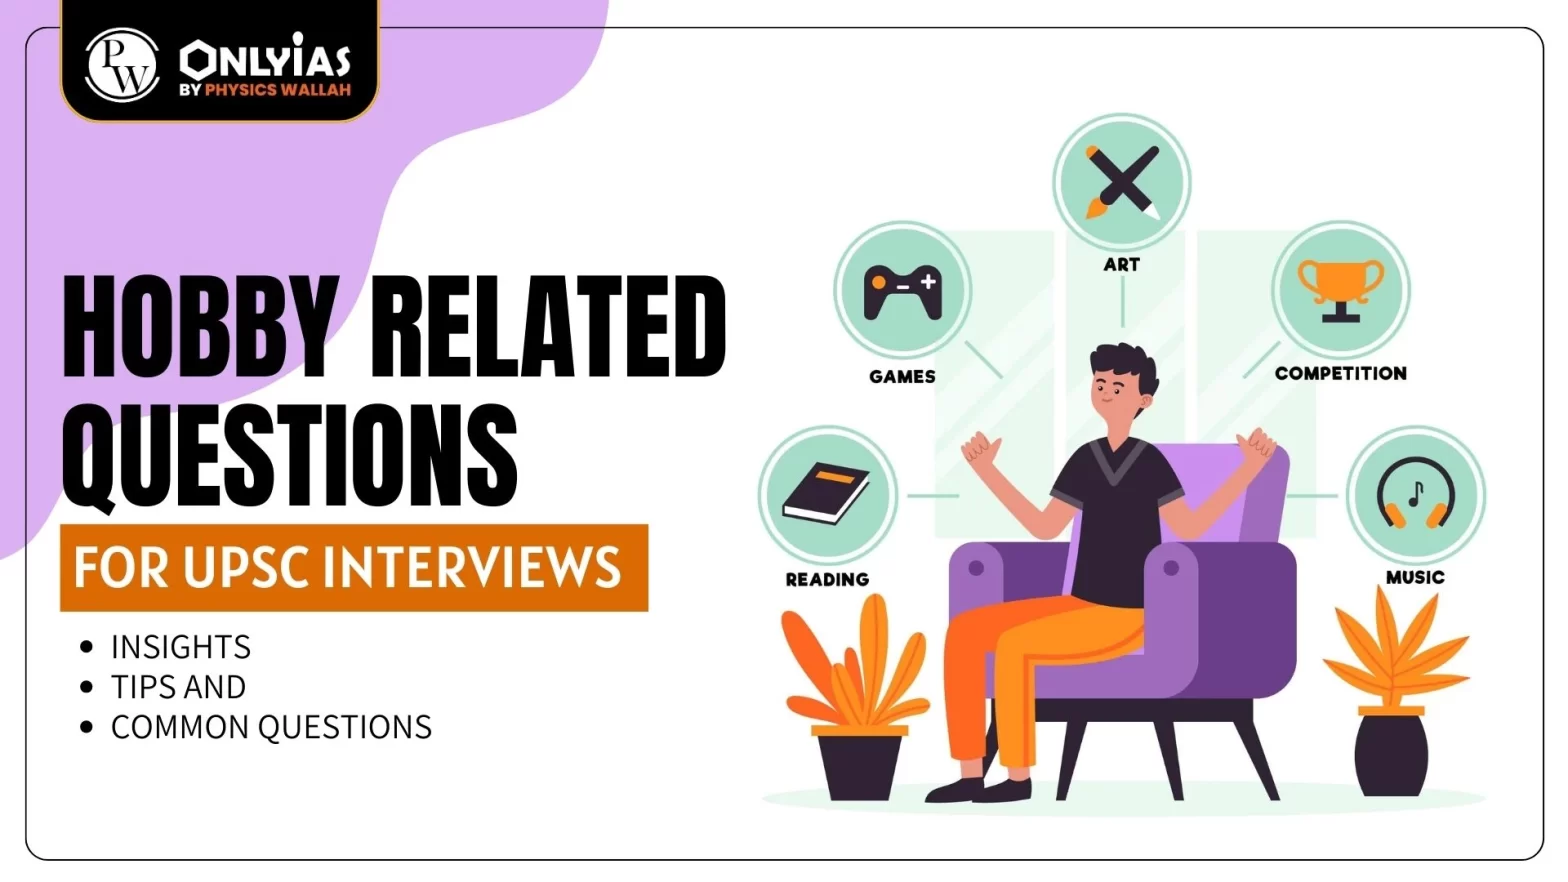 Hobby Related Questions For UPSC Interviews: Insights, Tips, and Common Questions